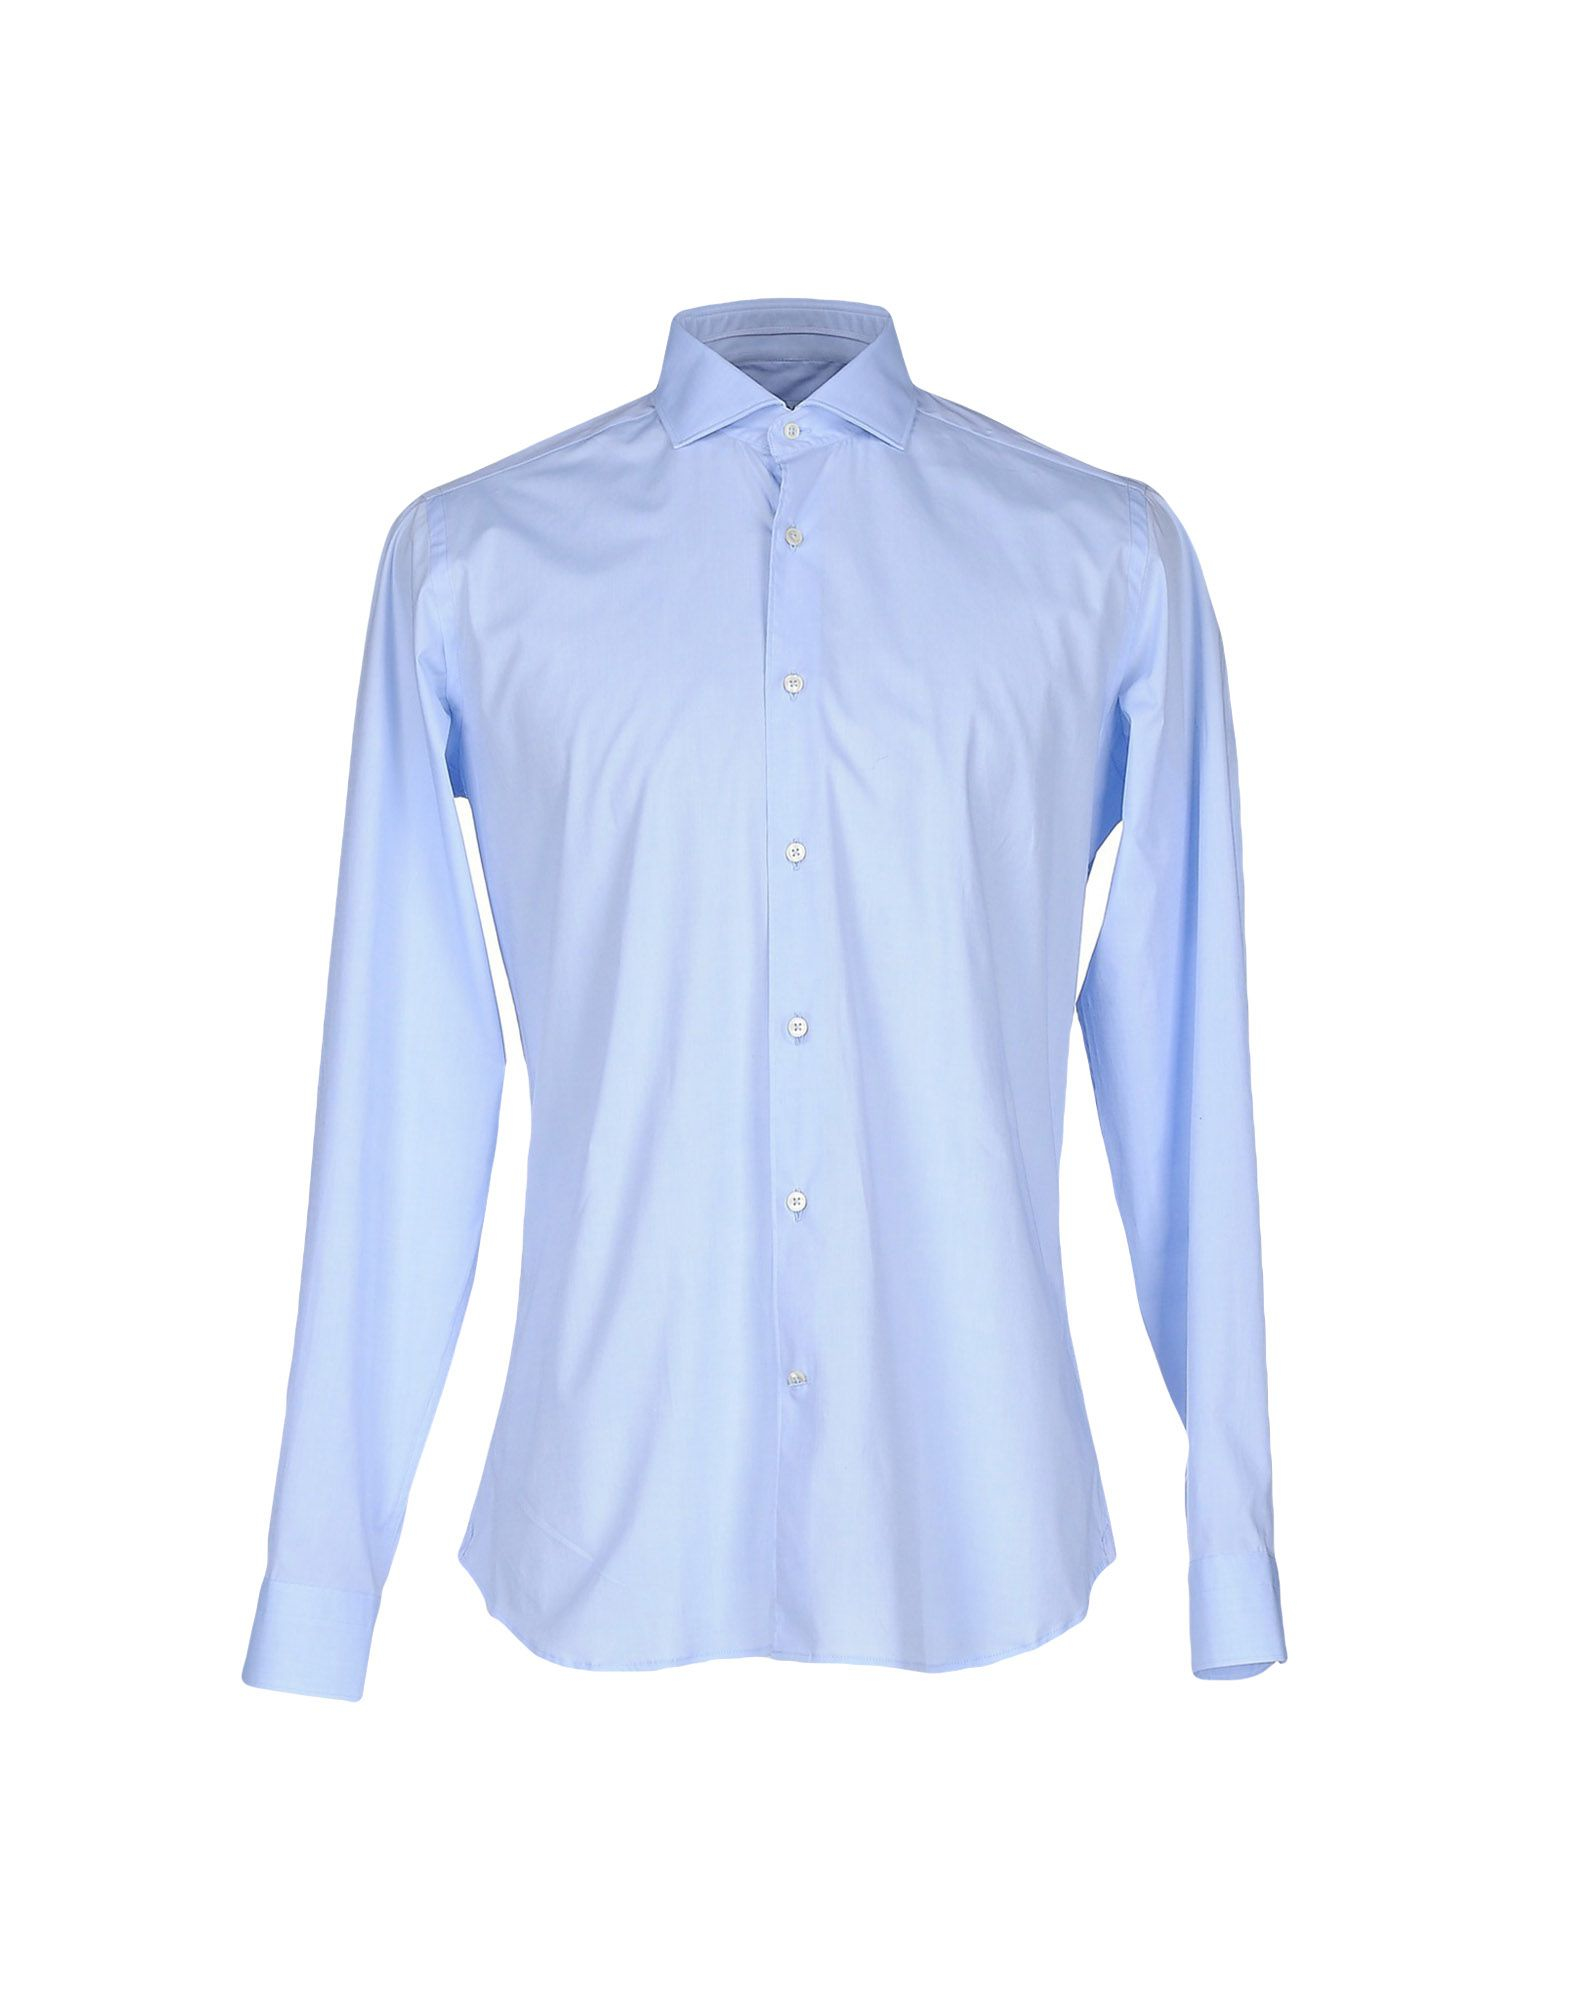 Lyst - Caliban Shirt in Blue for Men - Save 16%